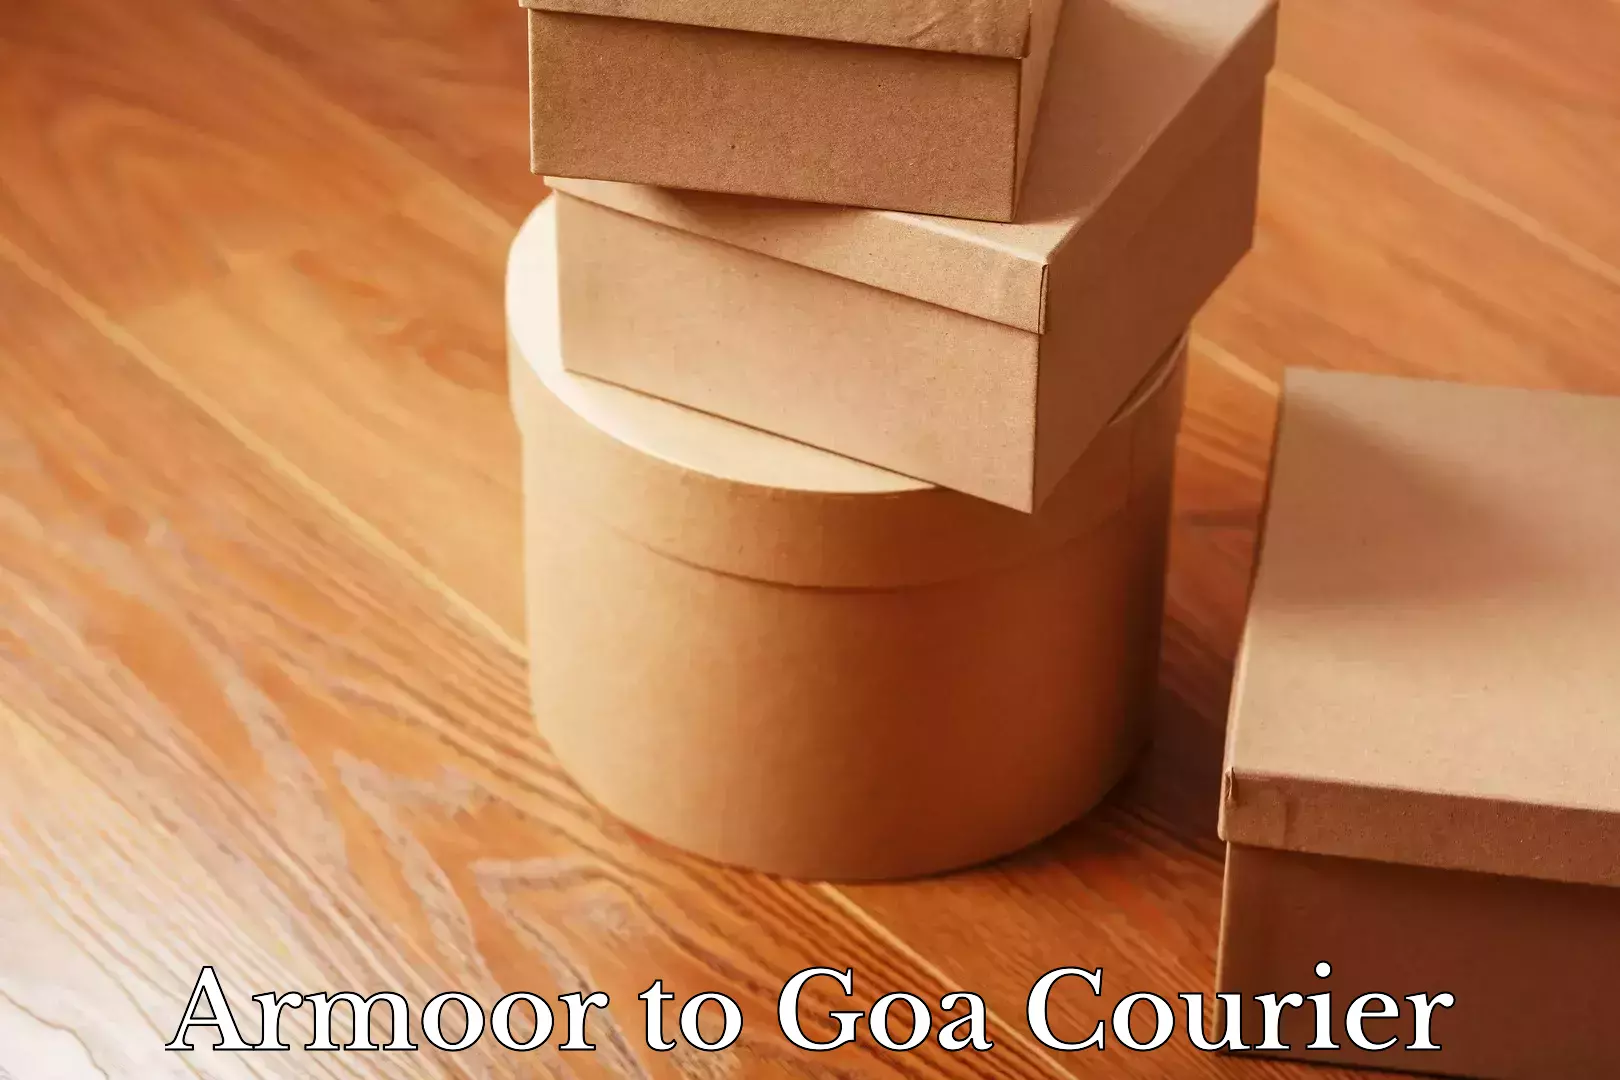 Reliable shipping partners Armoor to Goa